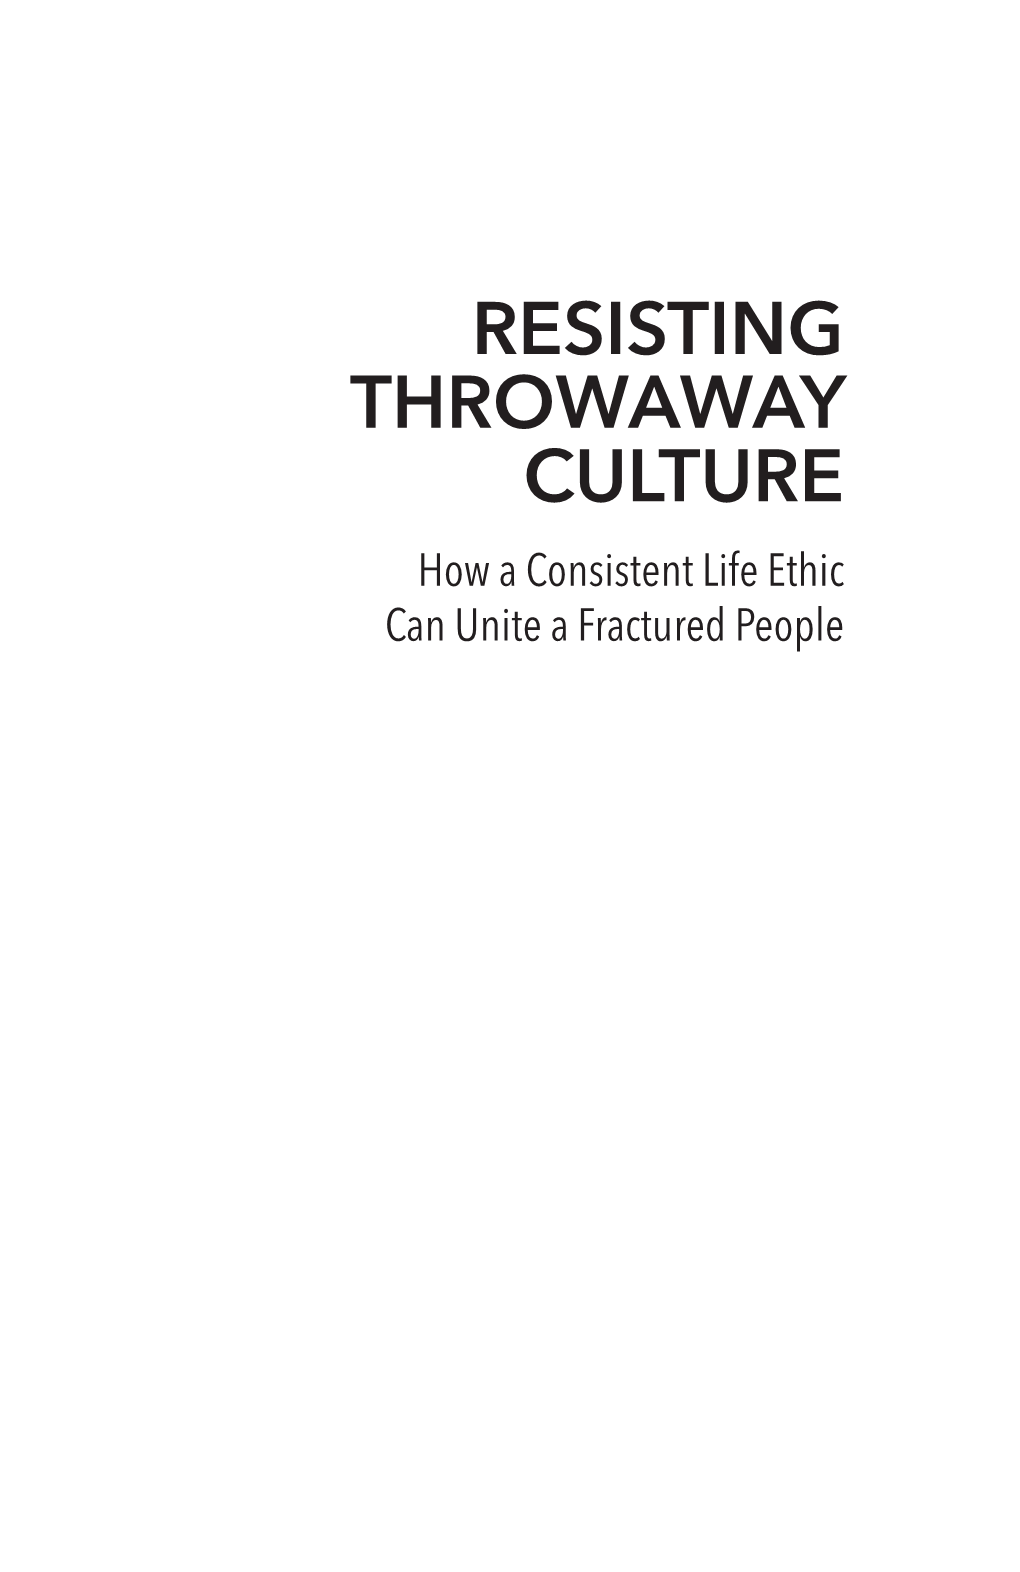 RESISTING THROWAWAY CULTURE How a Consistent Life Ethic Can Unite a Fractured People